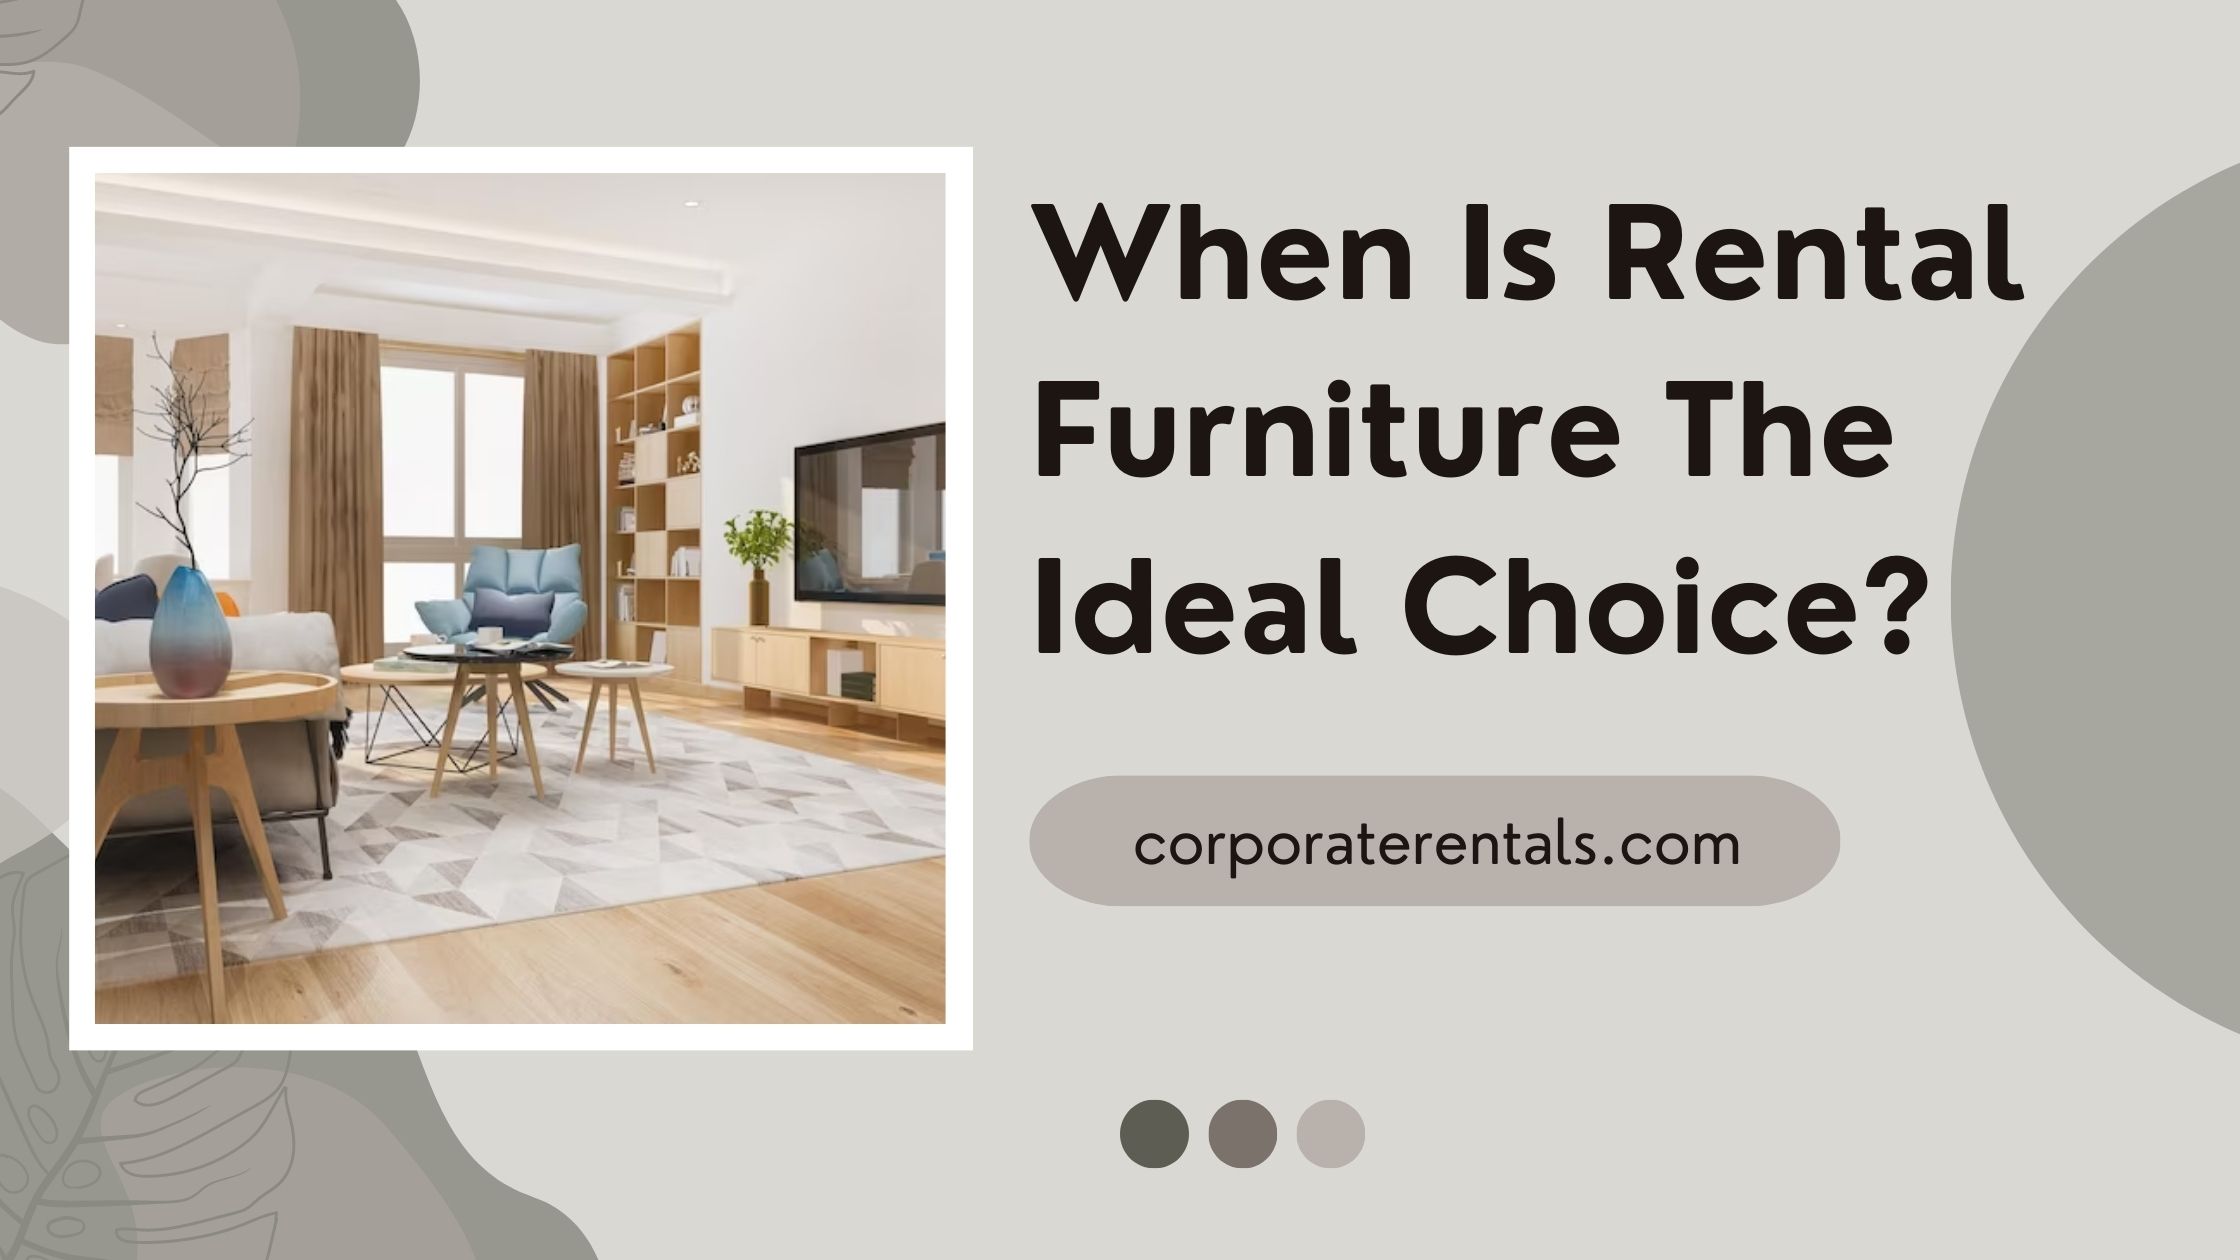 When Is Rental Furniture The Ideal Choice?